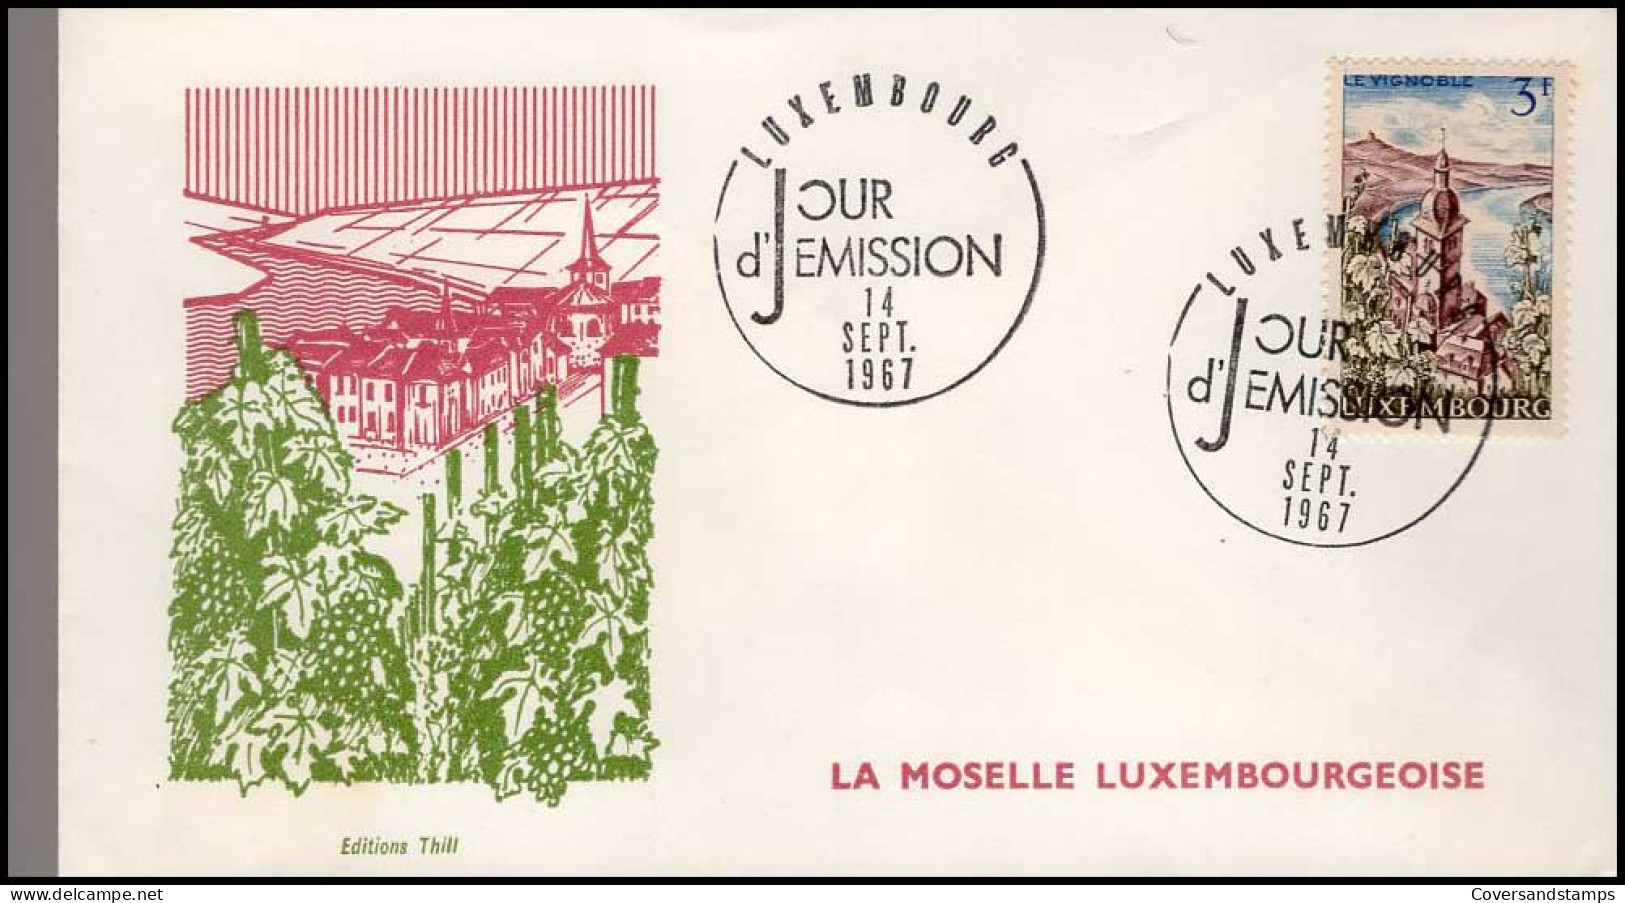 FDC - La Moselle Luxembourgeoise - FDC